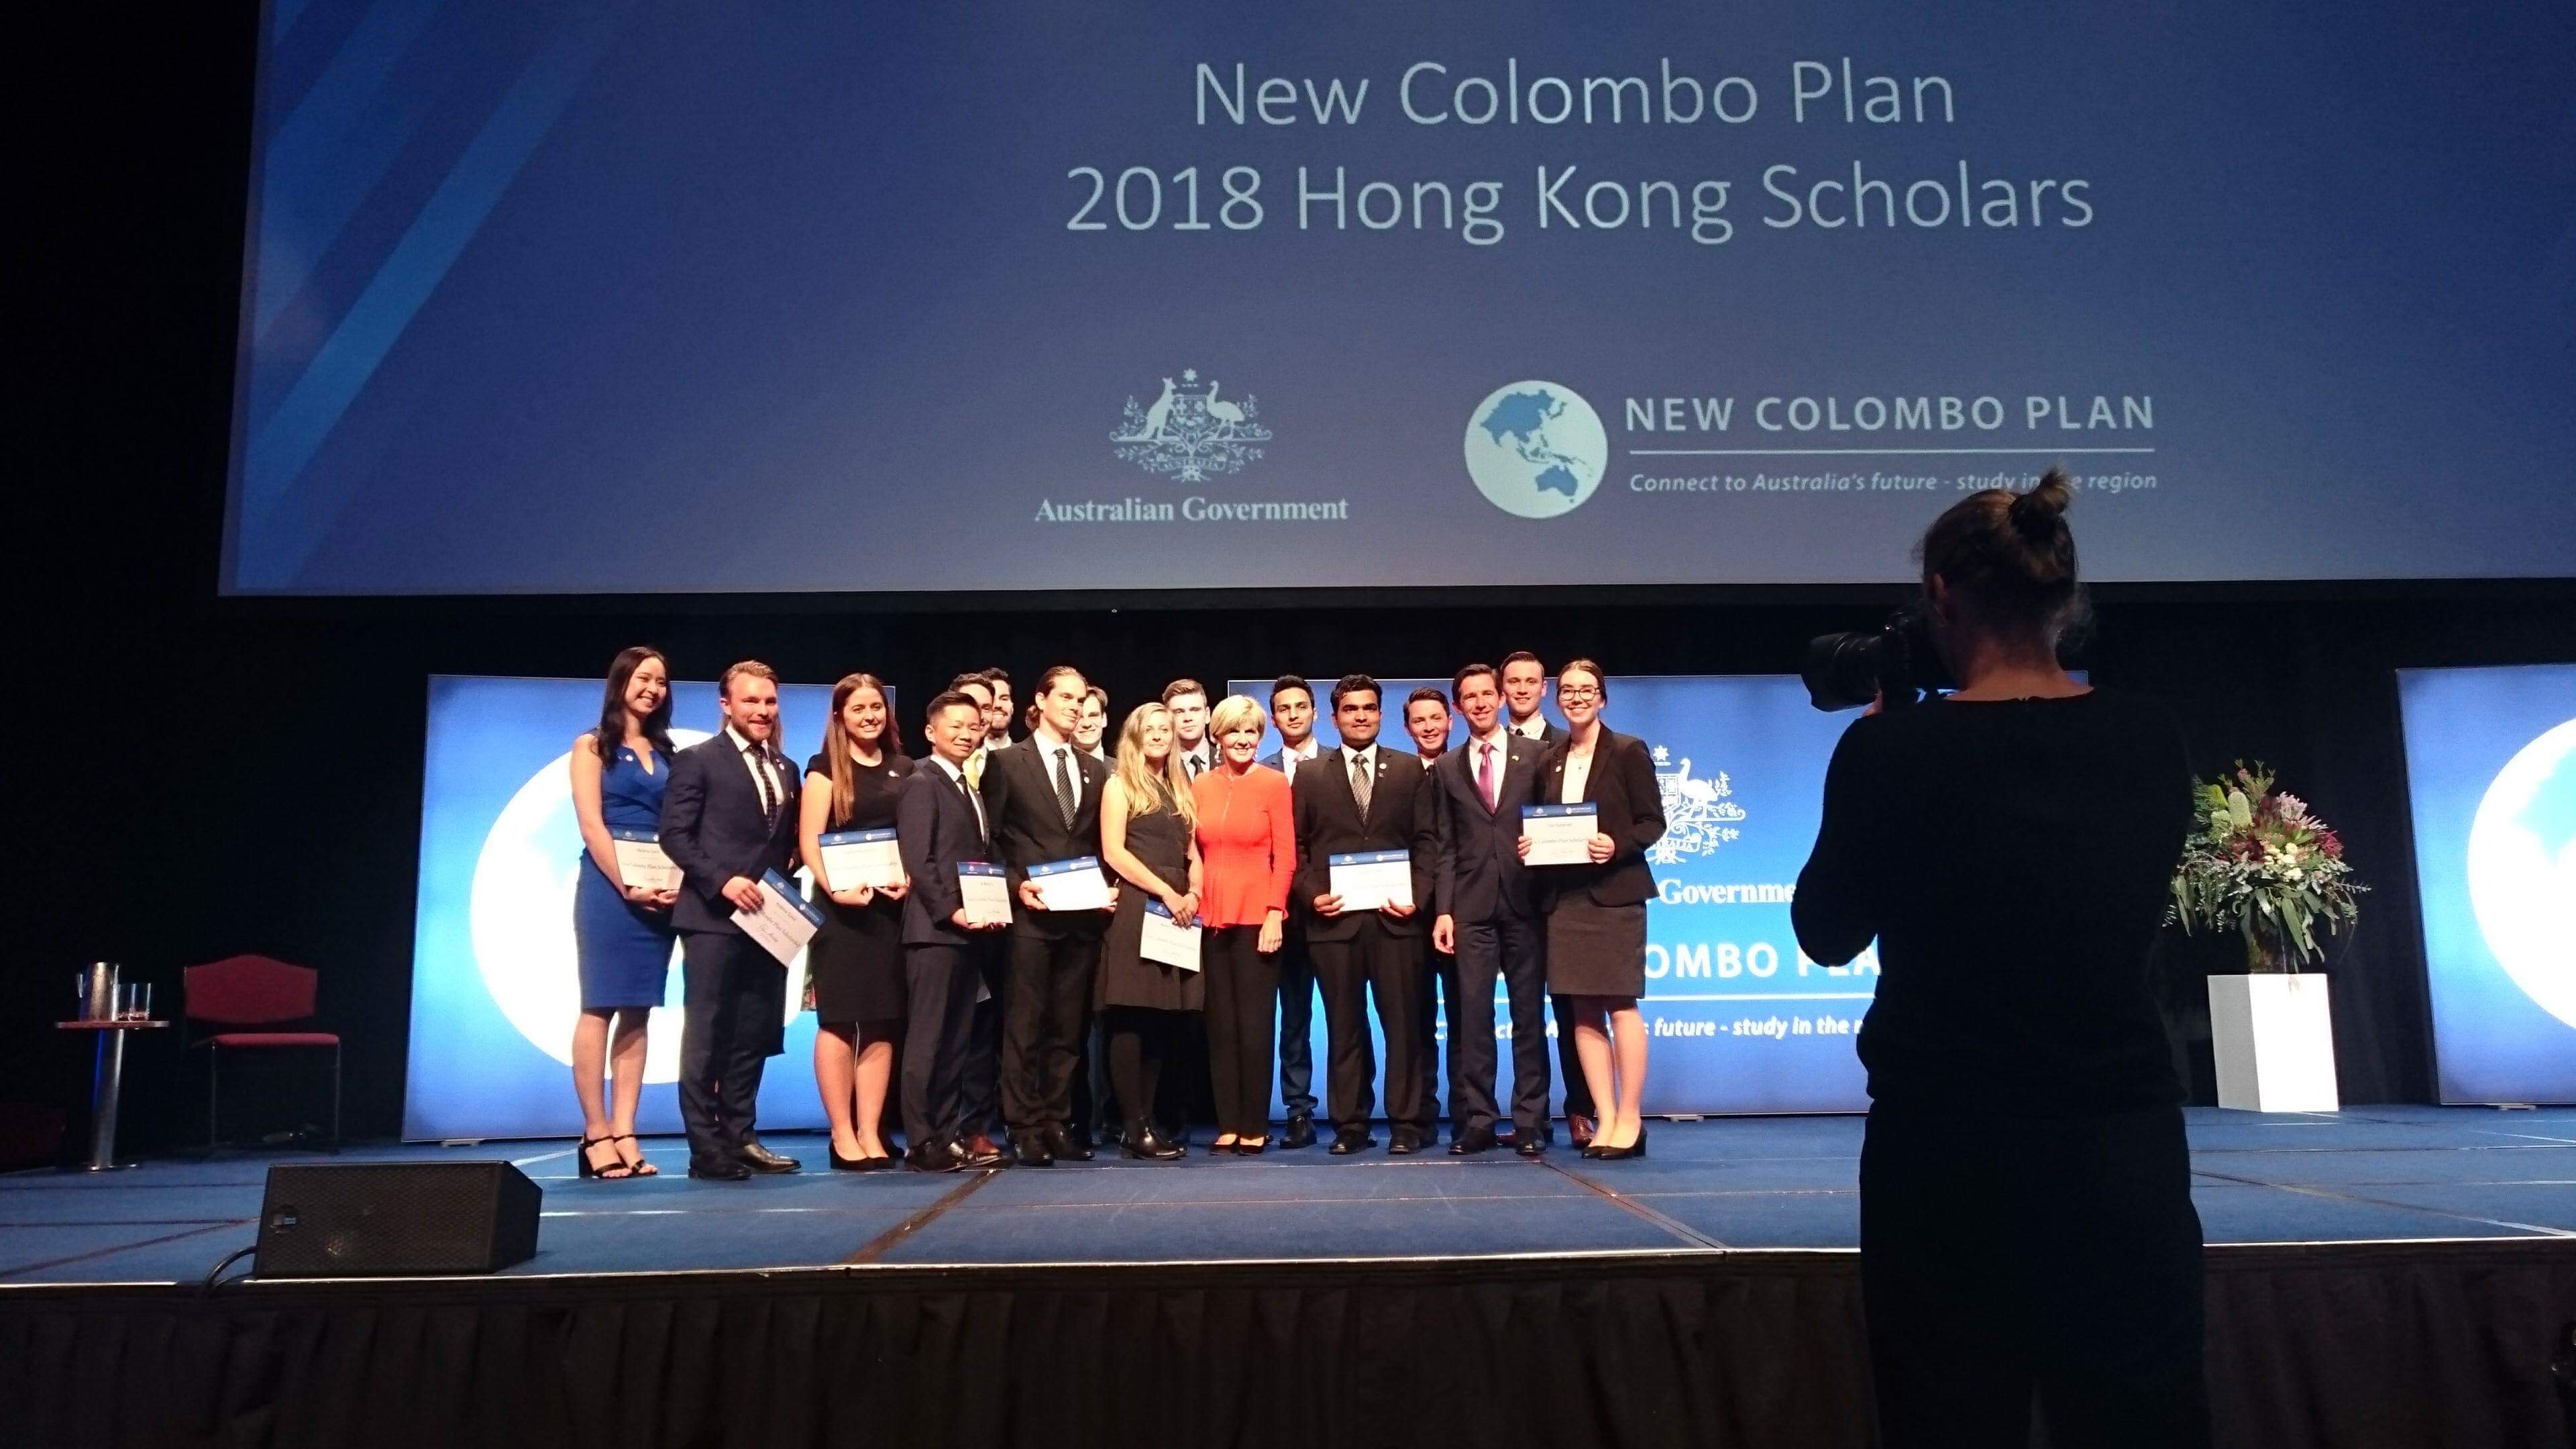 Six Griffith students have been named New Colombo Plan scholars for 2018.